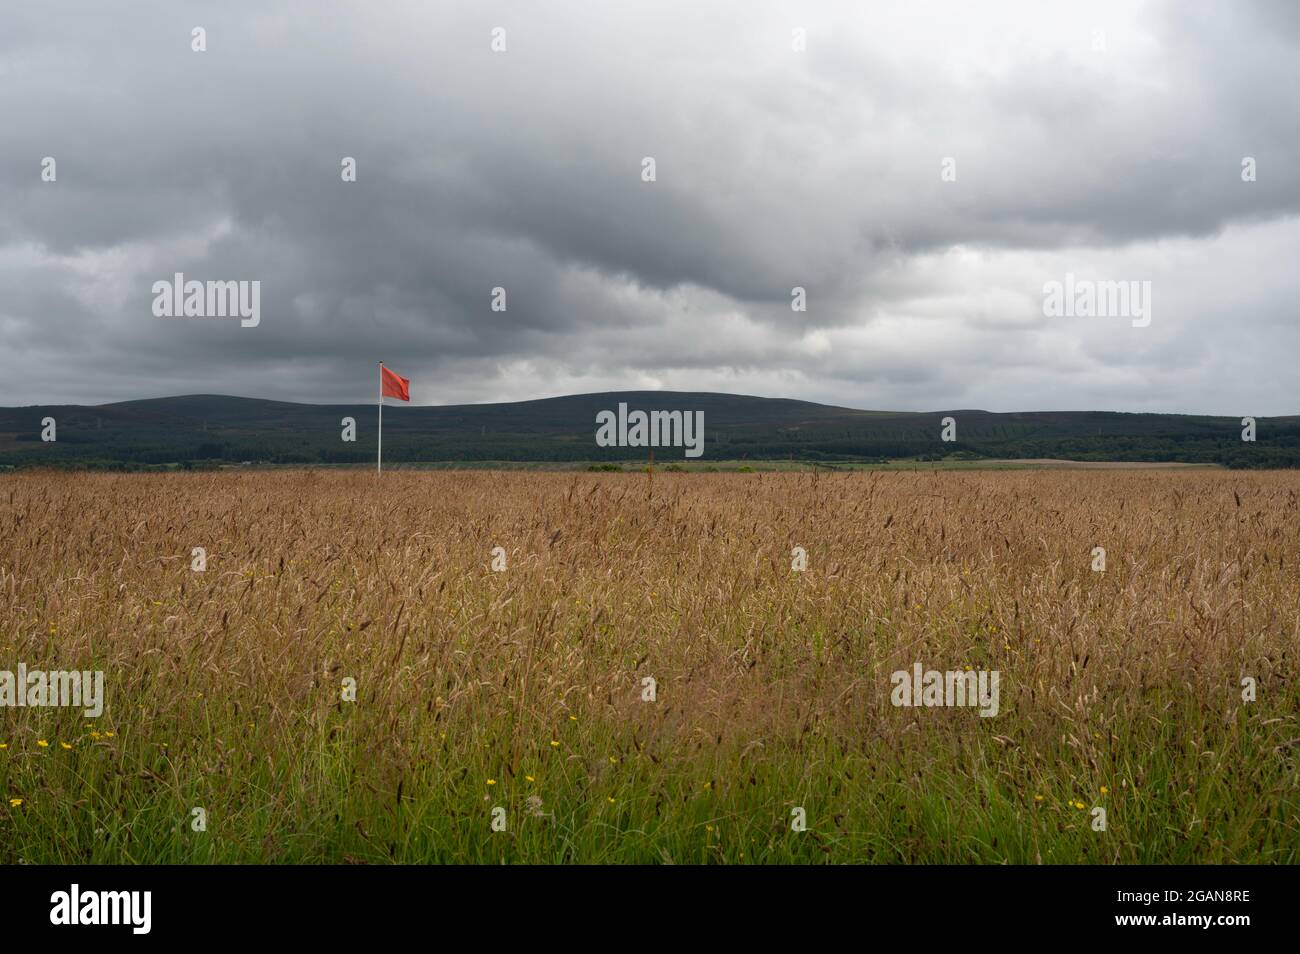 Culloden Moor in the Scottish Highlands with a red flag indicating the position of the English Army in the 1746 battle. Moody skies in the background. Stock Photo